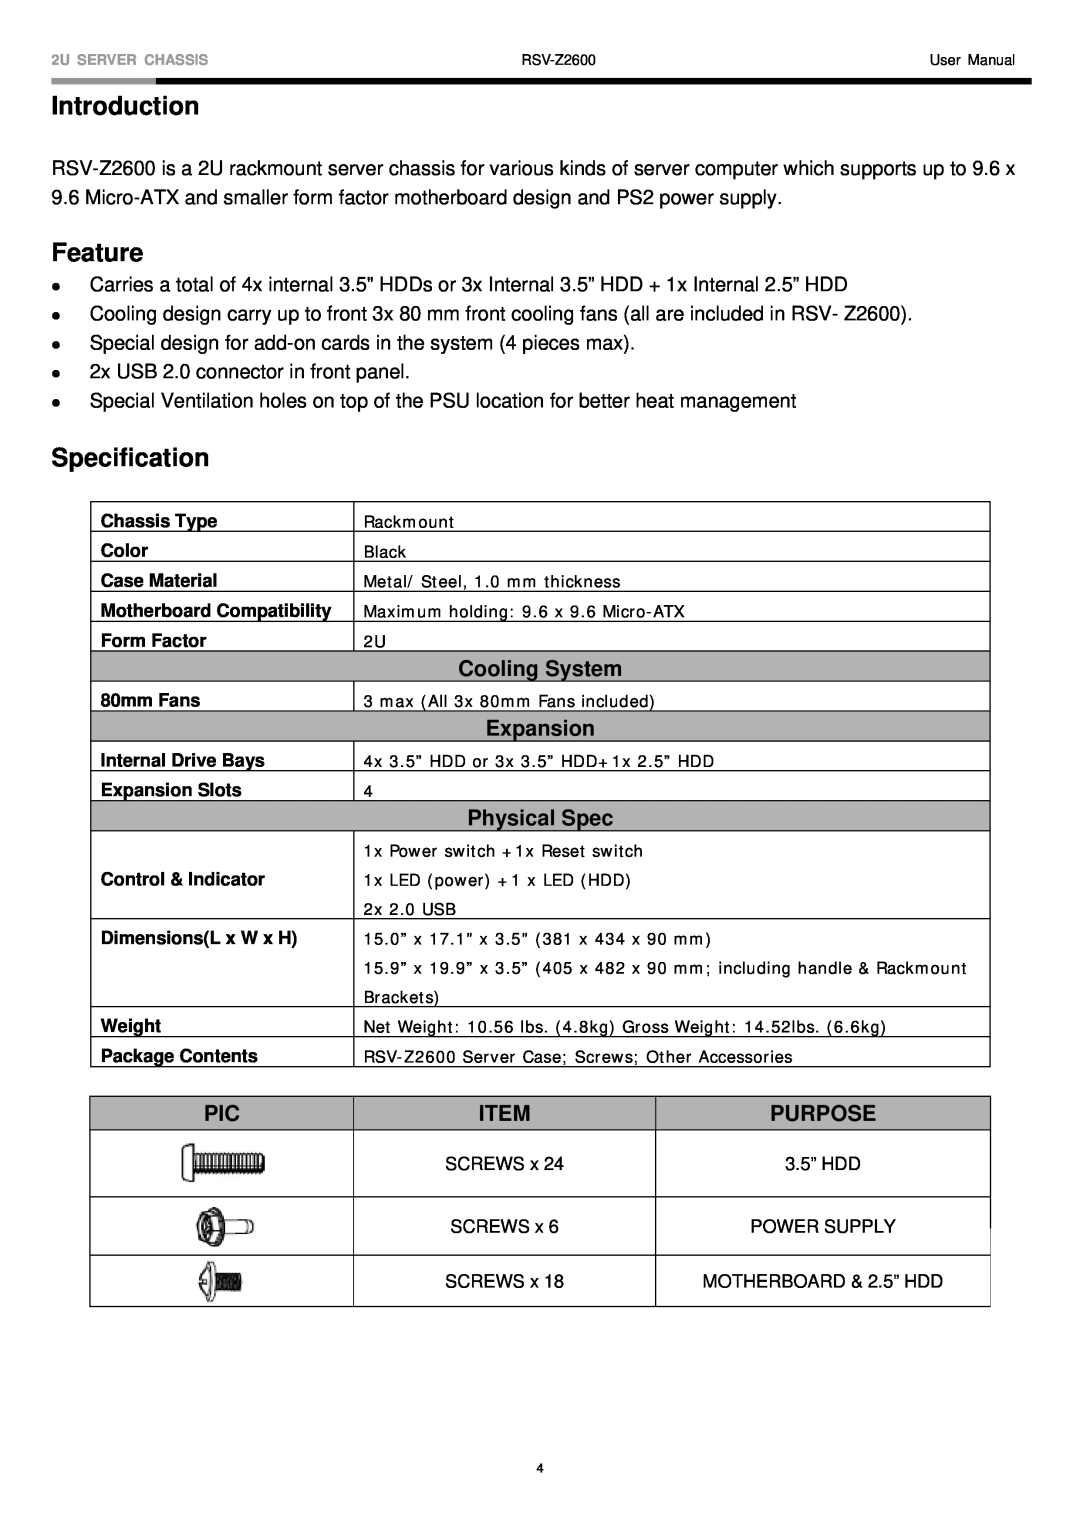 Rosewill RSV-Z2600 user manual Introduction, Feature, Specification, Cooling System, Expansion, Physical Spec, Purpose 